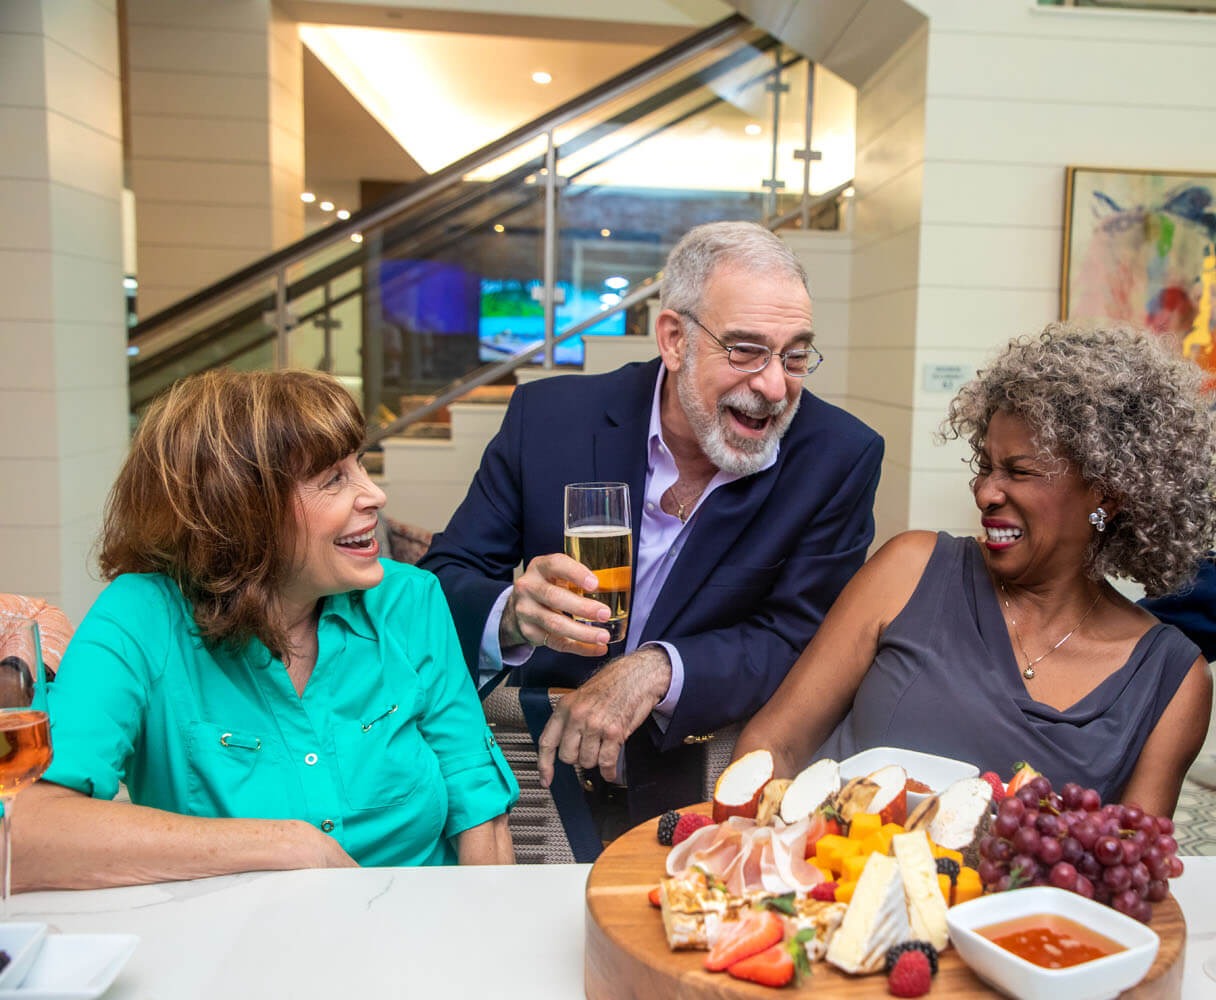 Residents laughing at happy hour